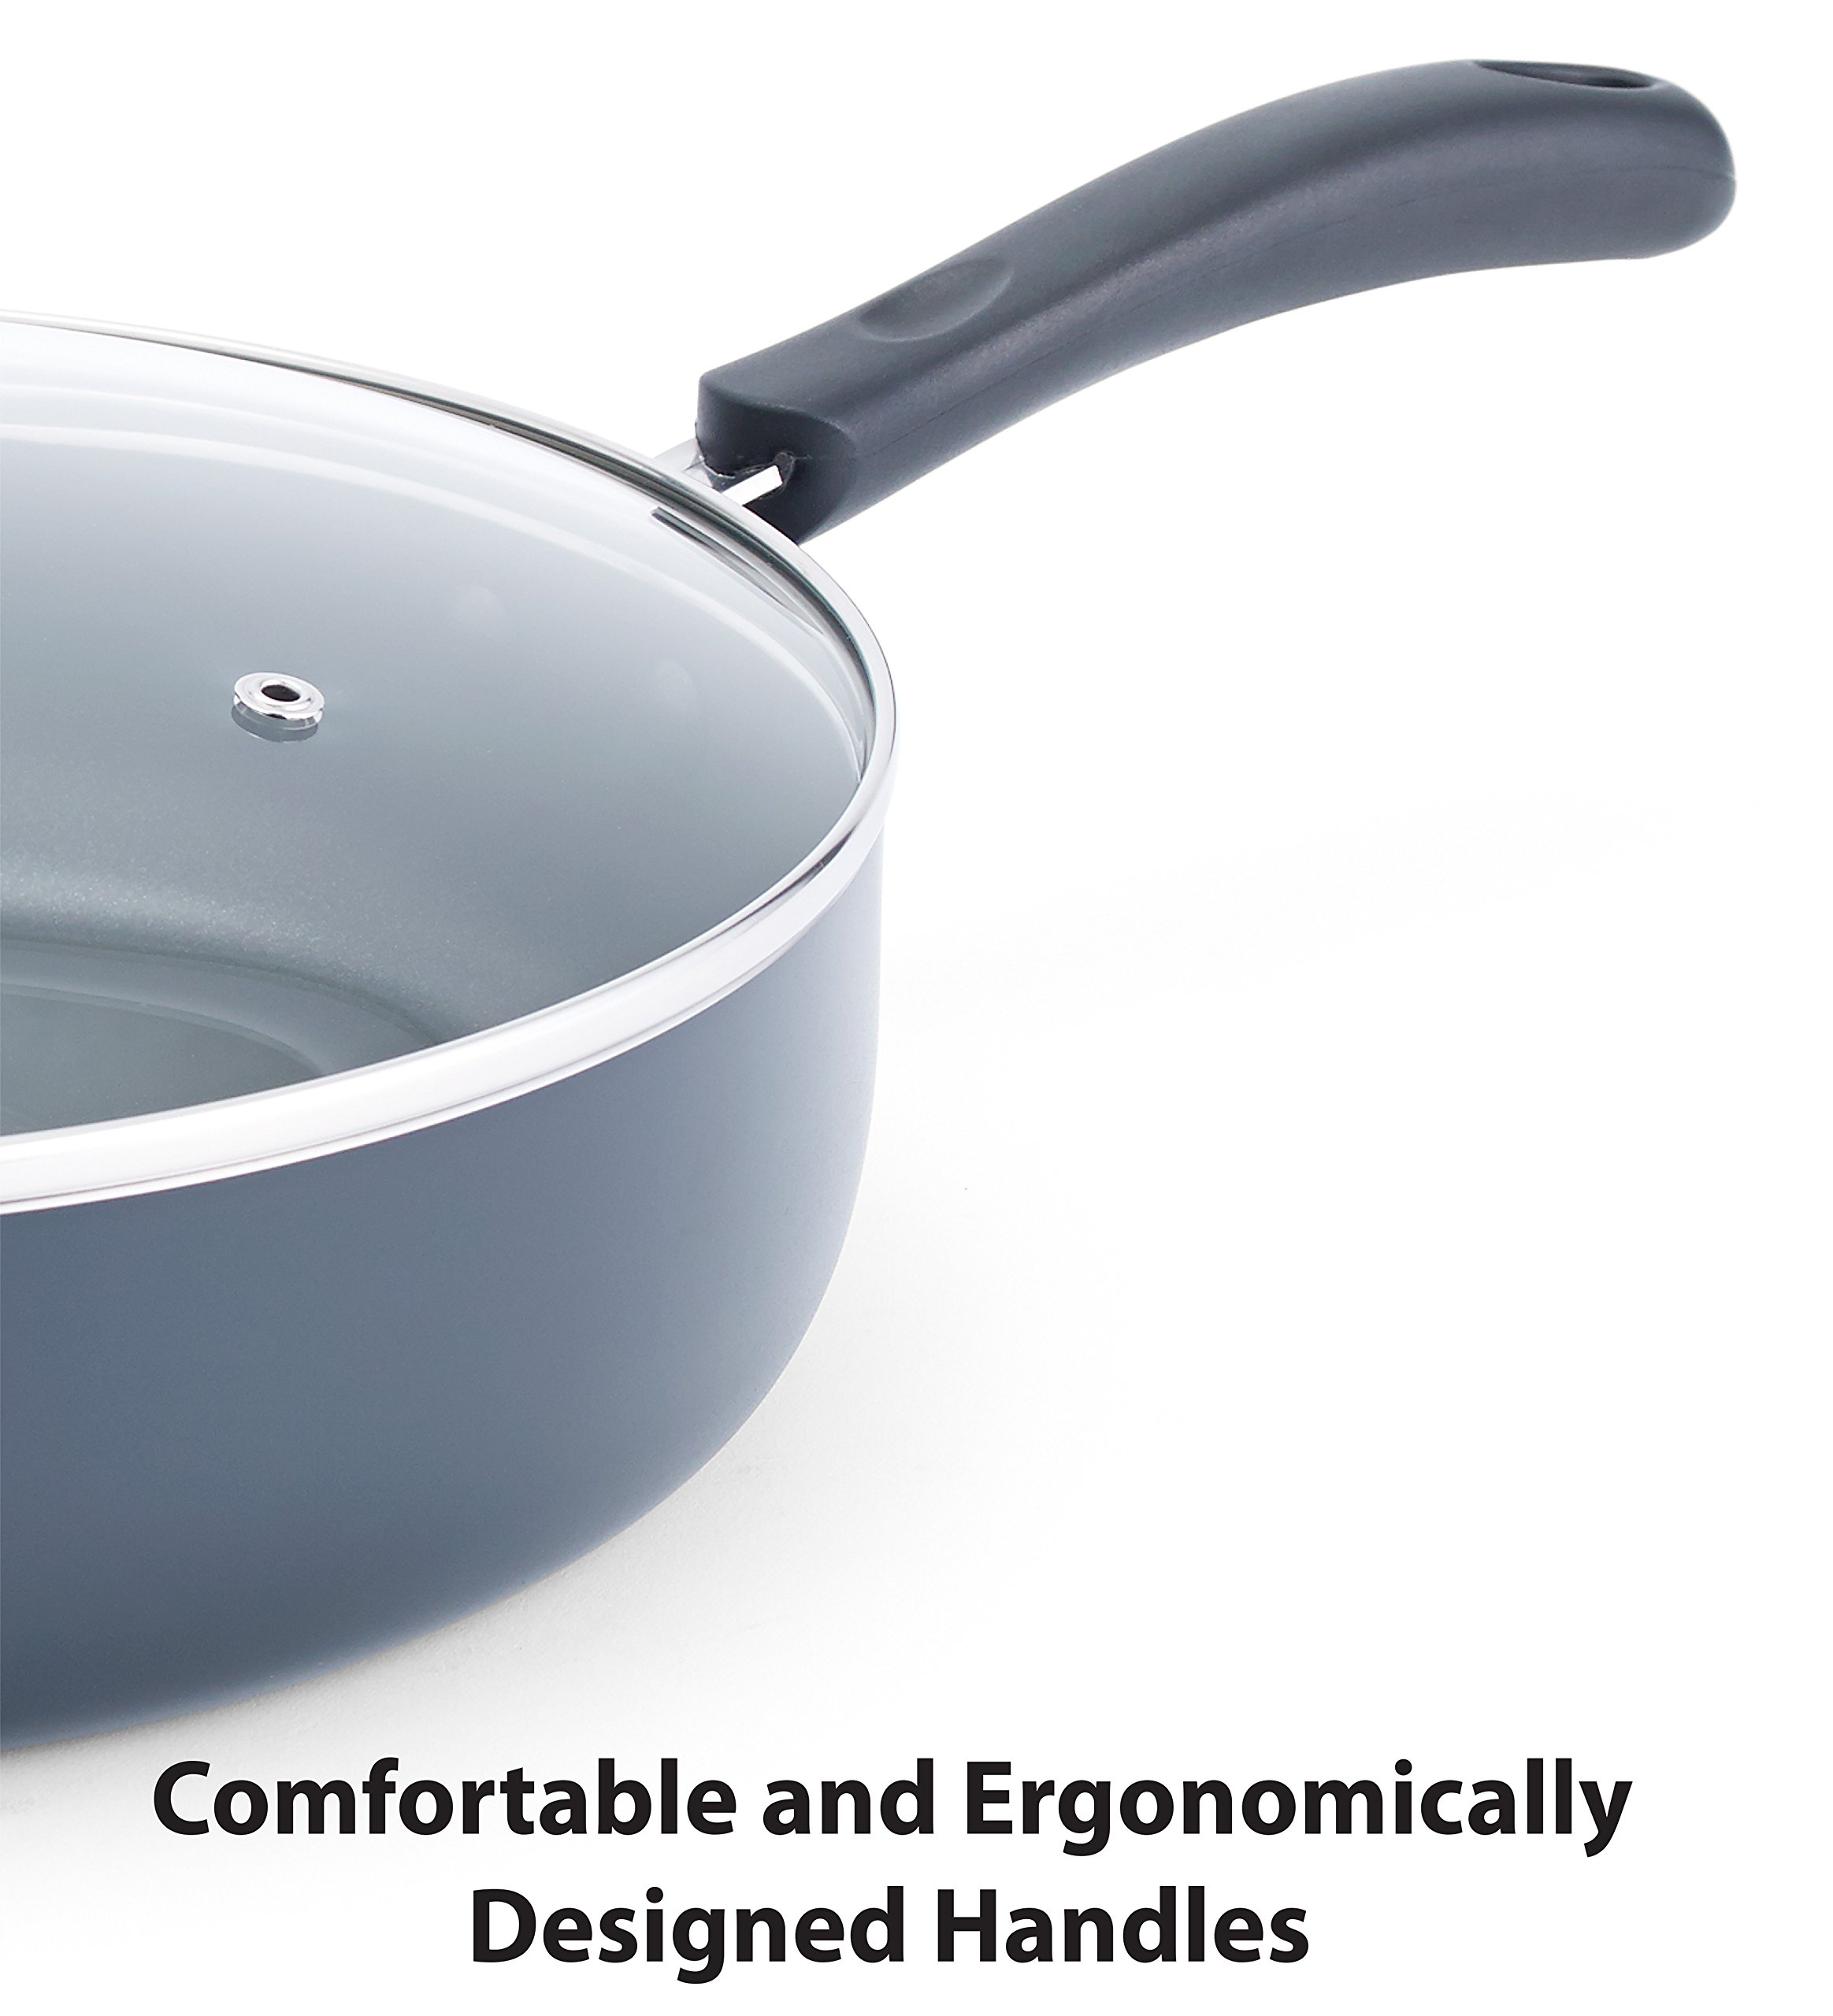 T-fal Specialty Nonstick Saute Pan with Glass Lid 5 Quart Cookware, Pots and Pans, Dishwasher Safe Black